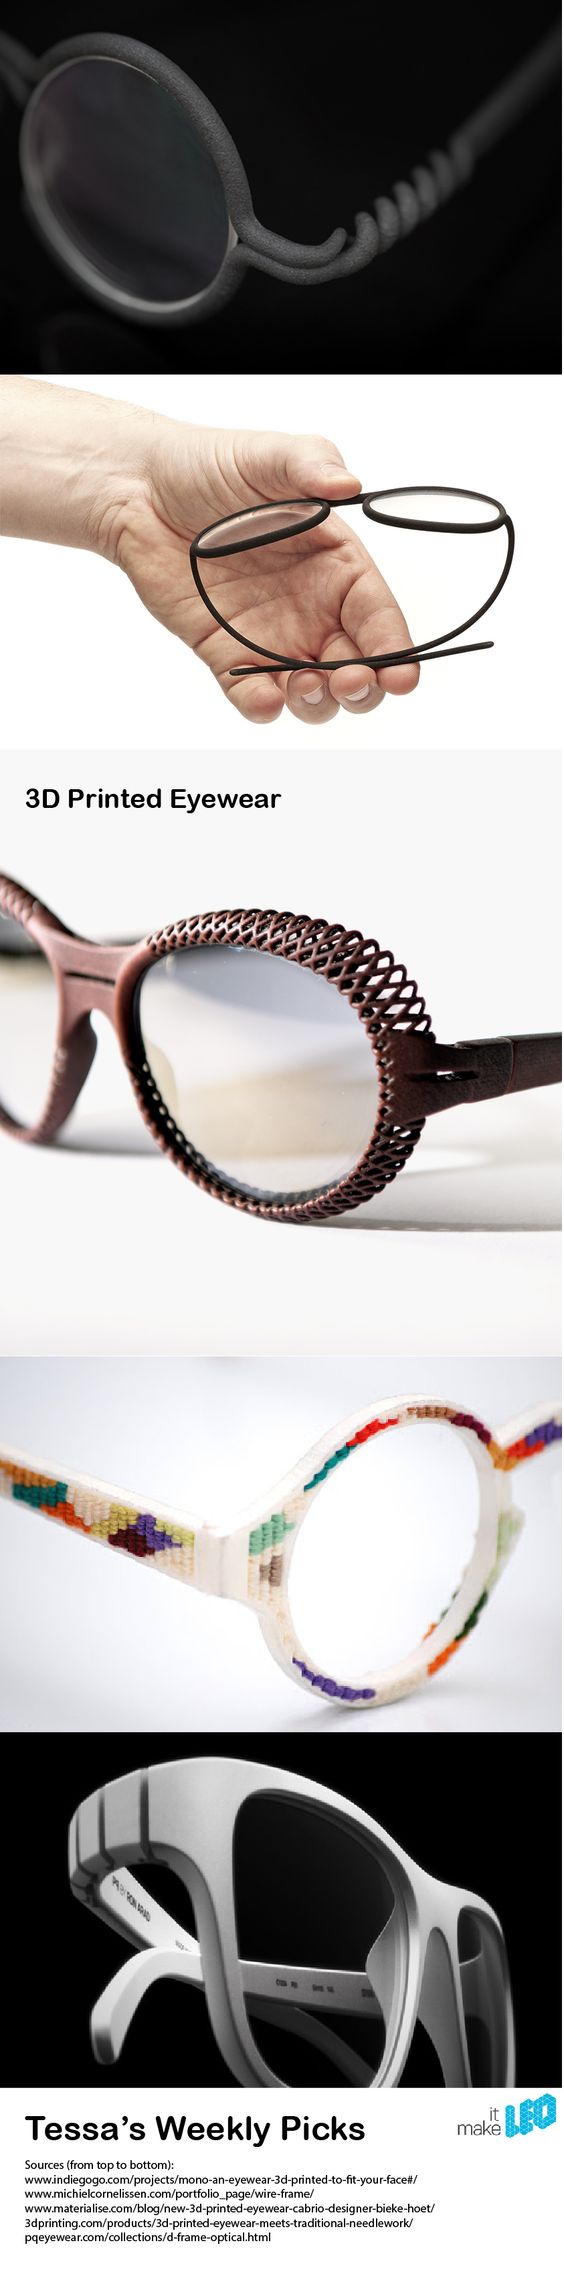 5 examples of 3D printed glasses with remarkable details. Have a closer look! | Make it LEO - Tessa's Weekly Picks